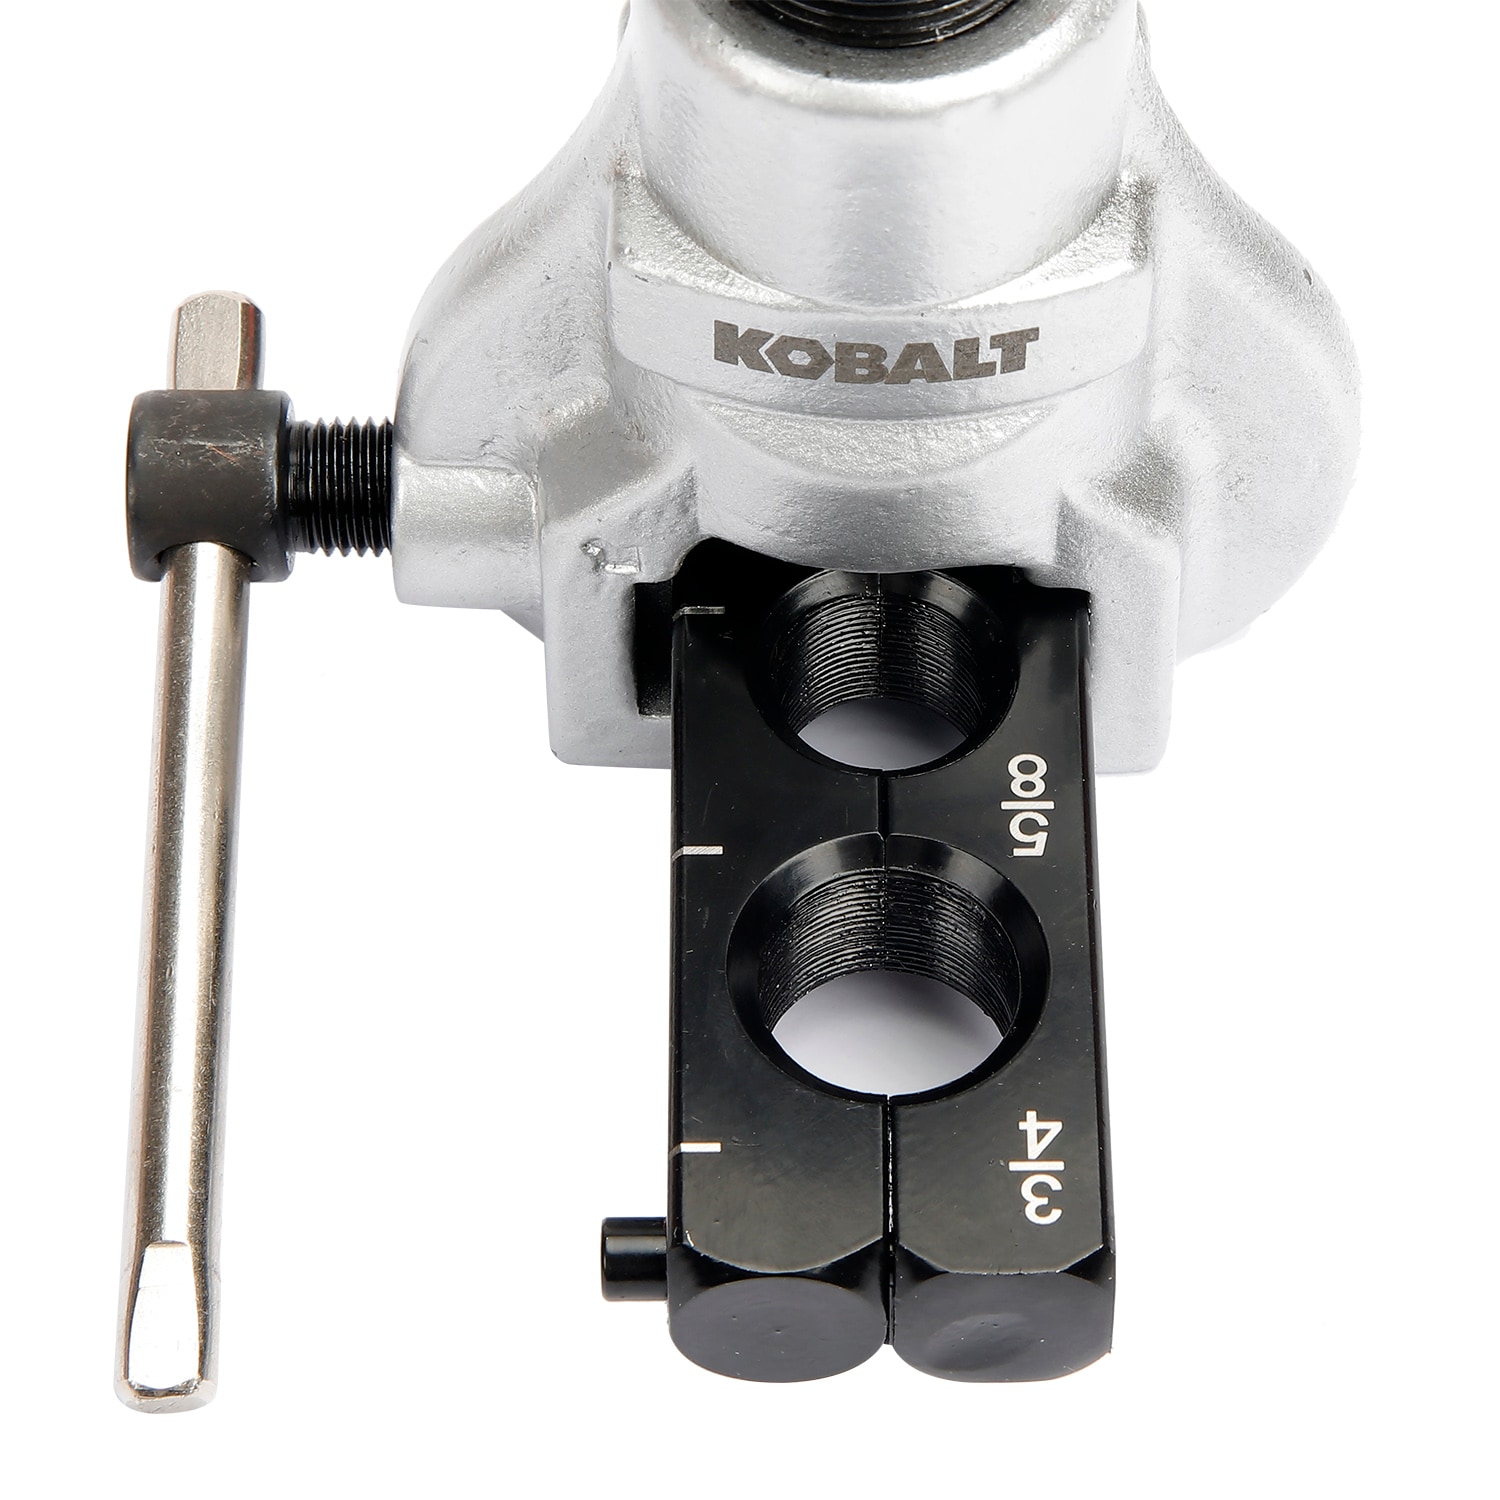 Kobalt Heavy Duty Flaring Tool in the Plumbing Wrenches